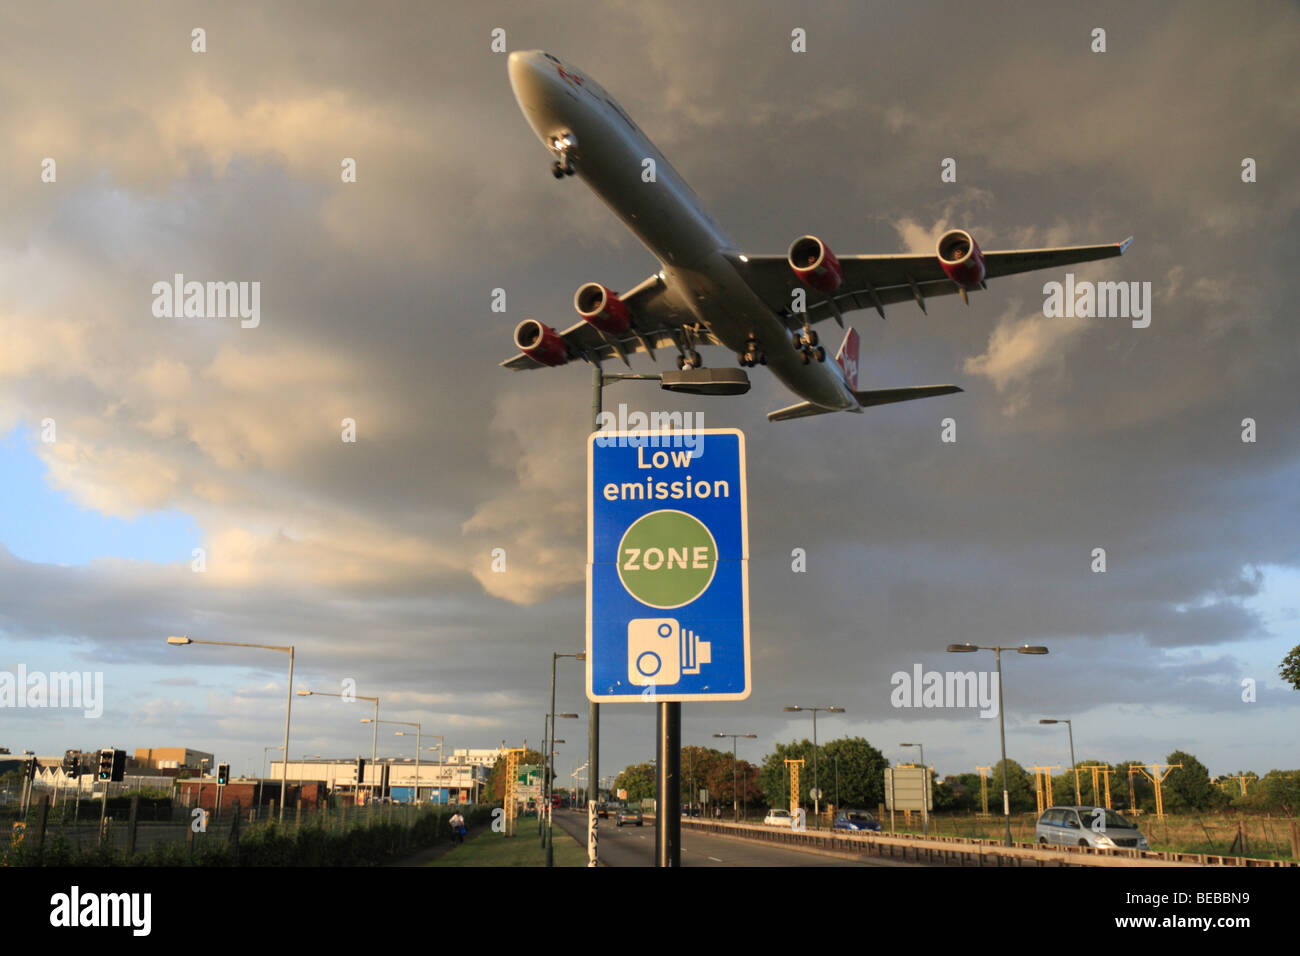 A Virgin Atlantic aircraft passes over a 'Low Emission Zone' road sign beside London's Heathrow Airport, UK. Stock Photo